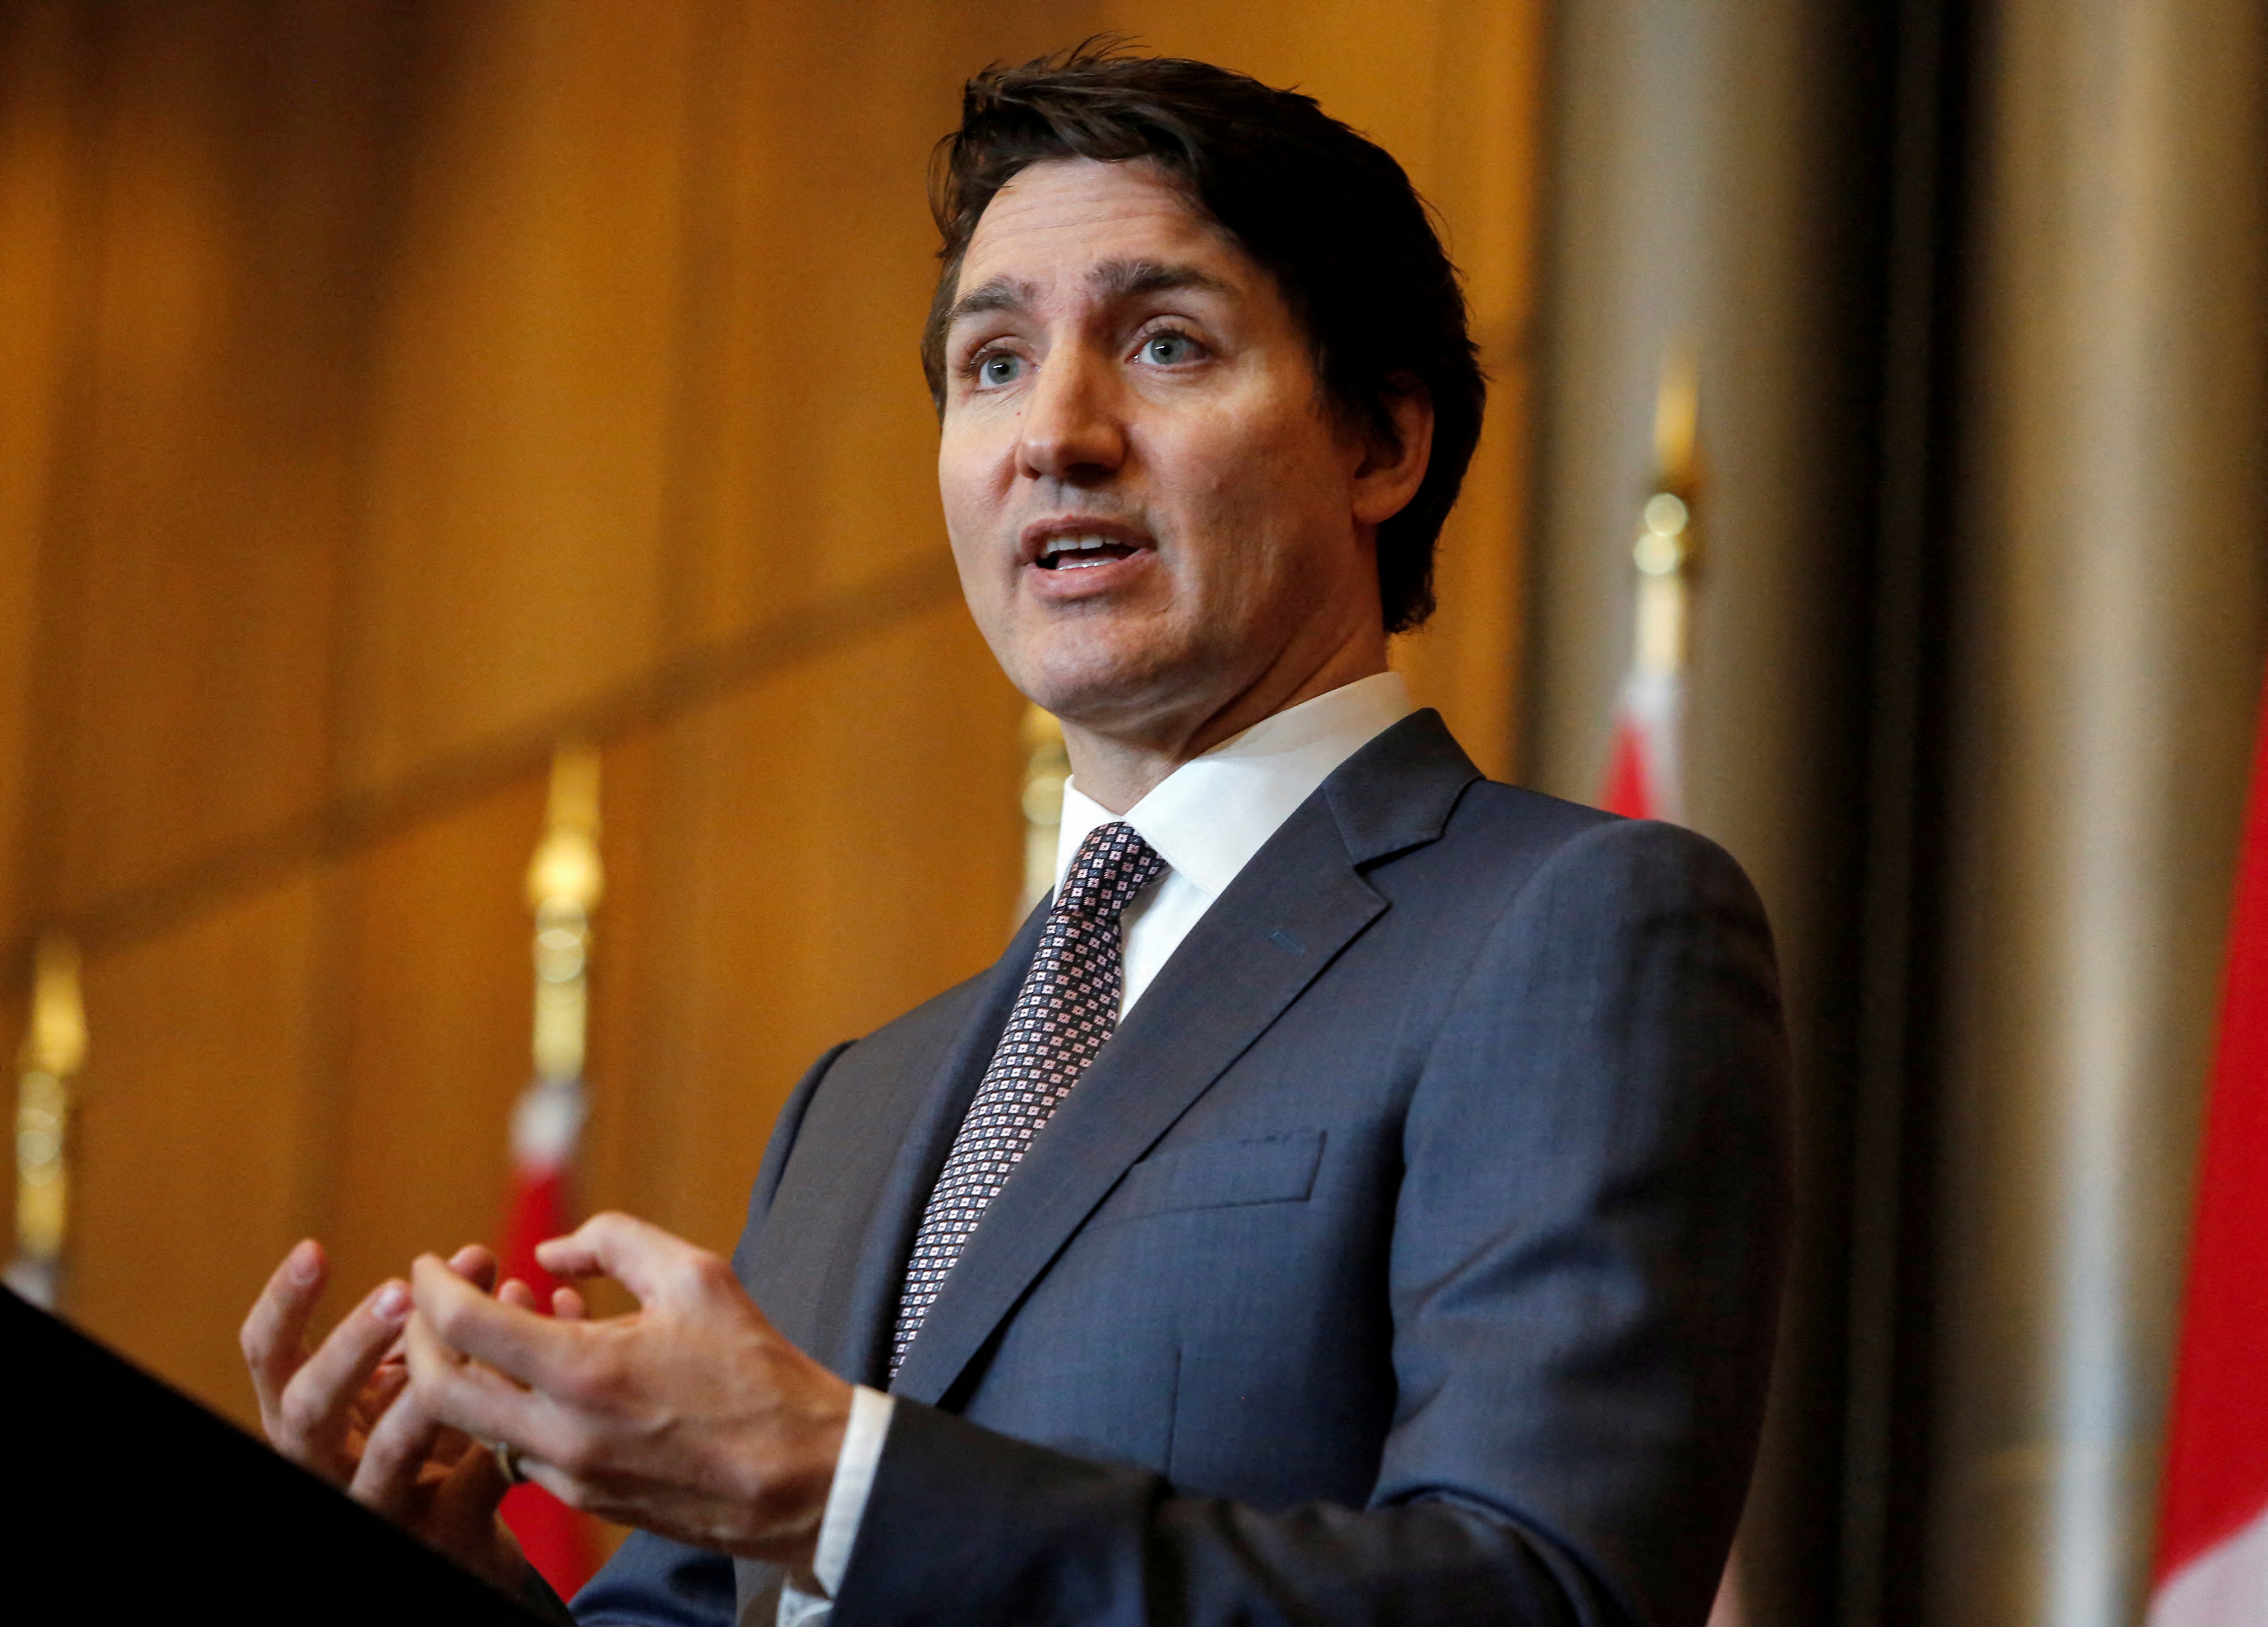 Canada's prime minister, Justin Trudeau, speaks at a press conference in Ottawa